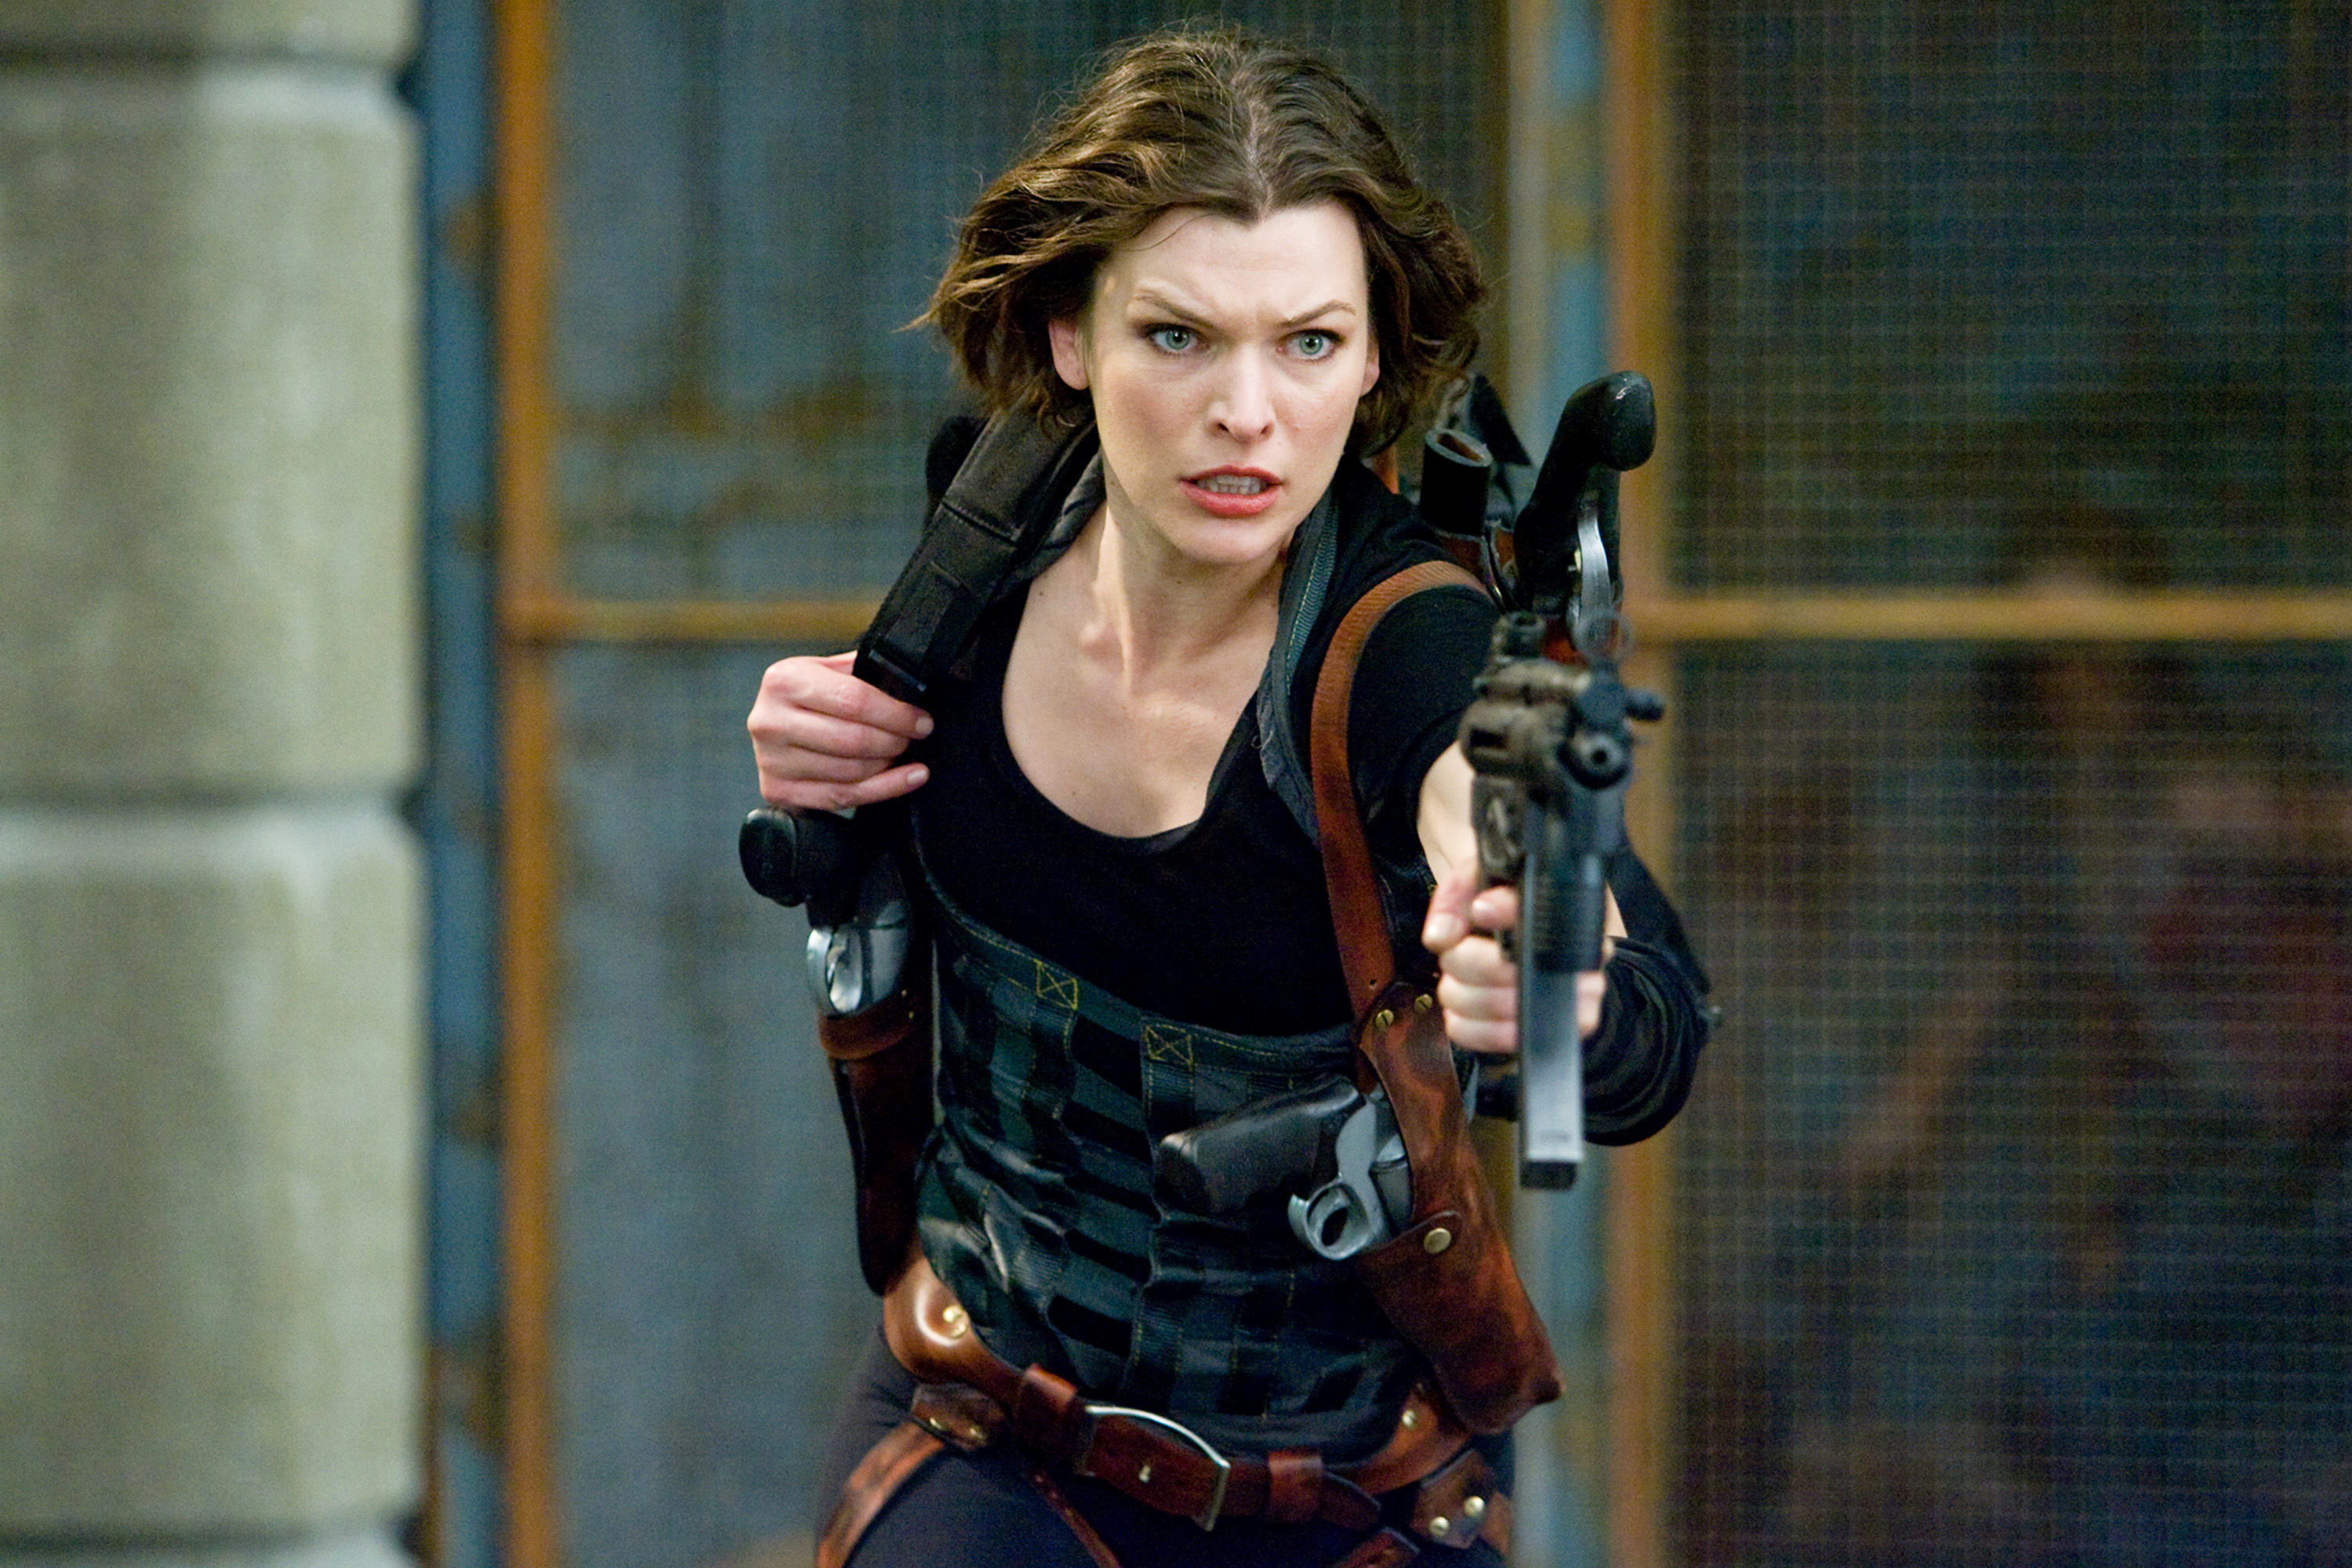 Resident Evil Afterlife Hd Wallpaper Background Image 3000x2000 10836 Hot Sex Picture